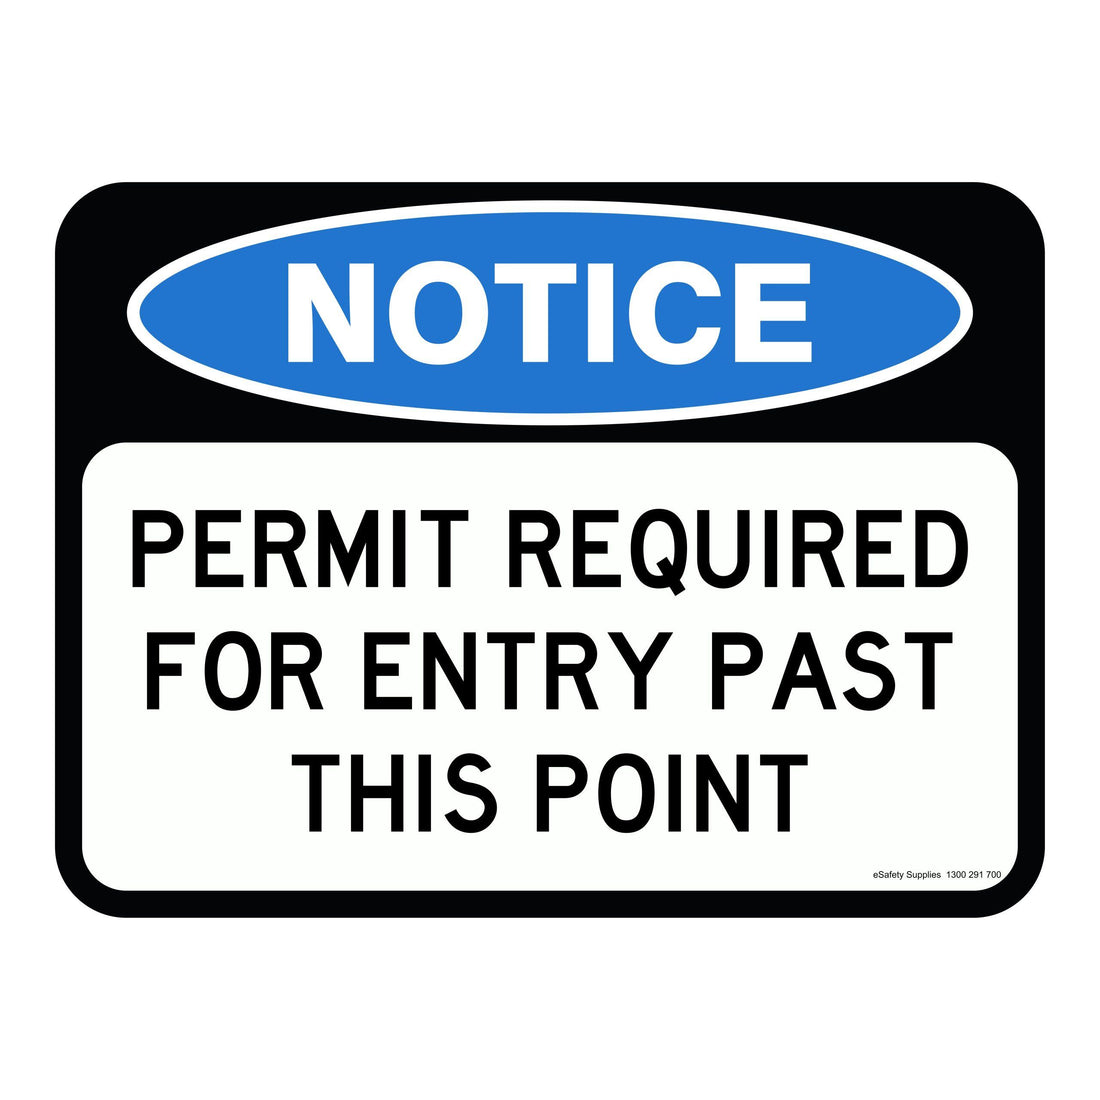 NOTICE - PERMIT REQUIRED FOR ENTRY PAST THIS POINT